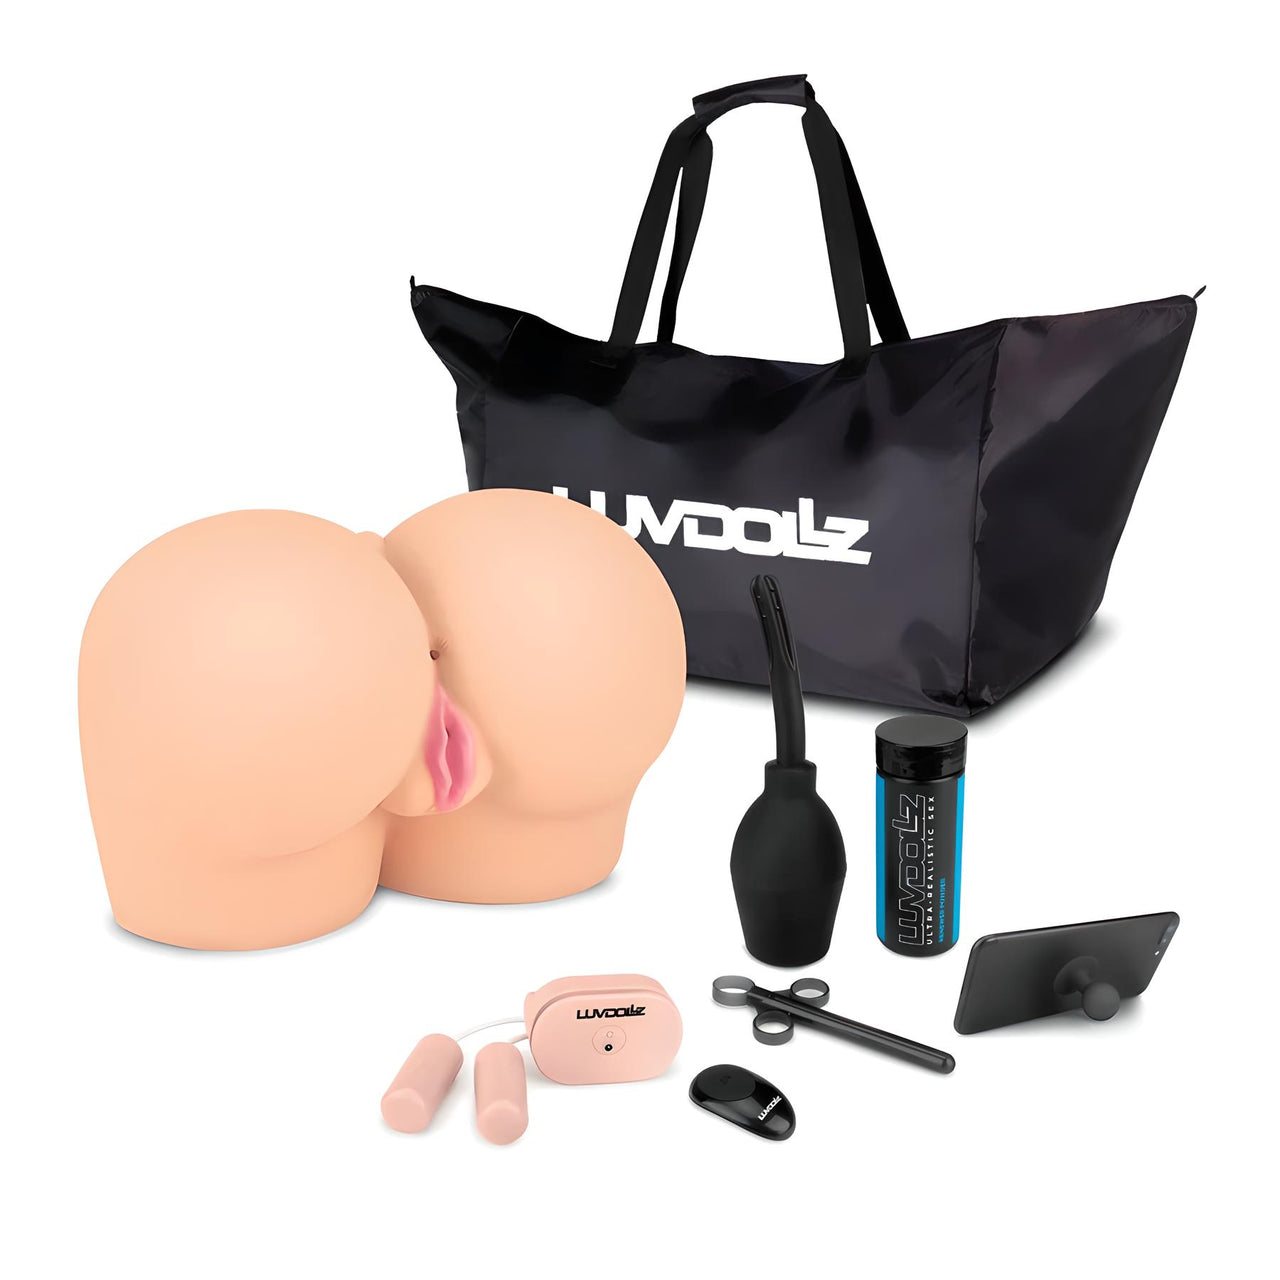 Luvdollz Remote Control Doggy Style Pussy and Ass Kit